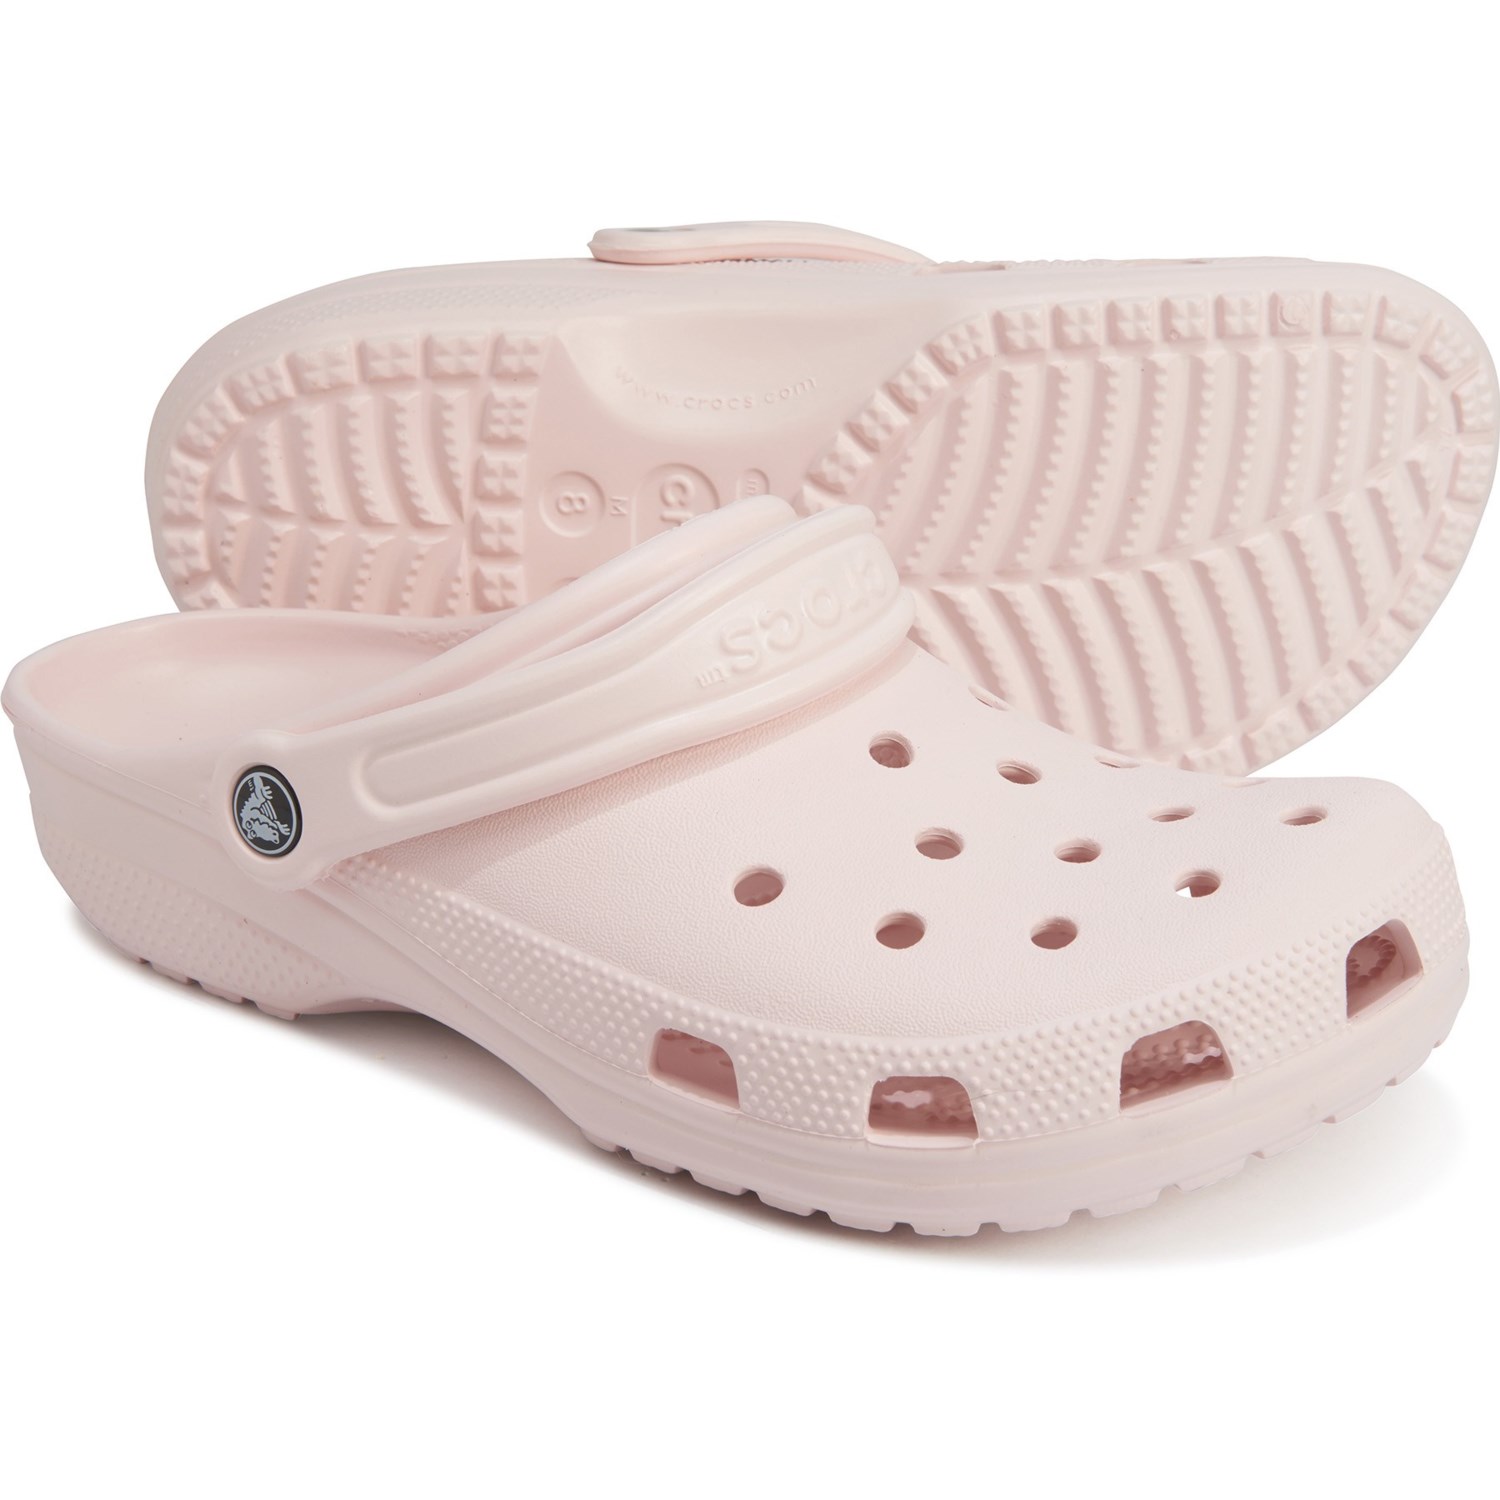 barely pink crocs size 7